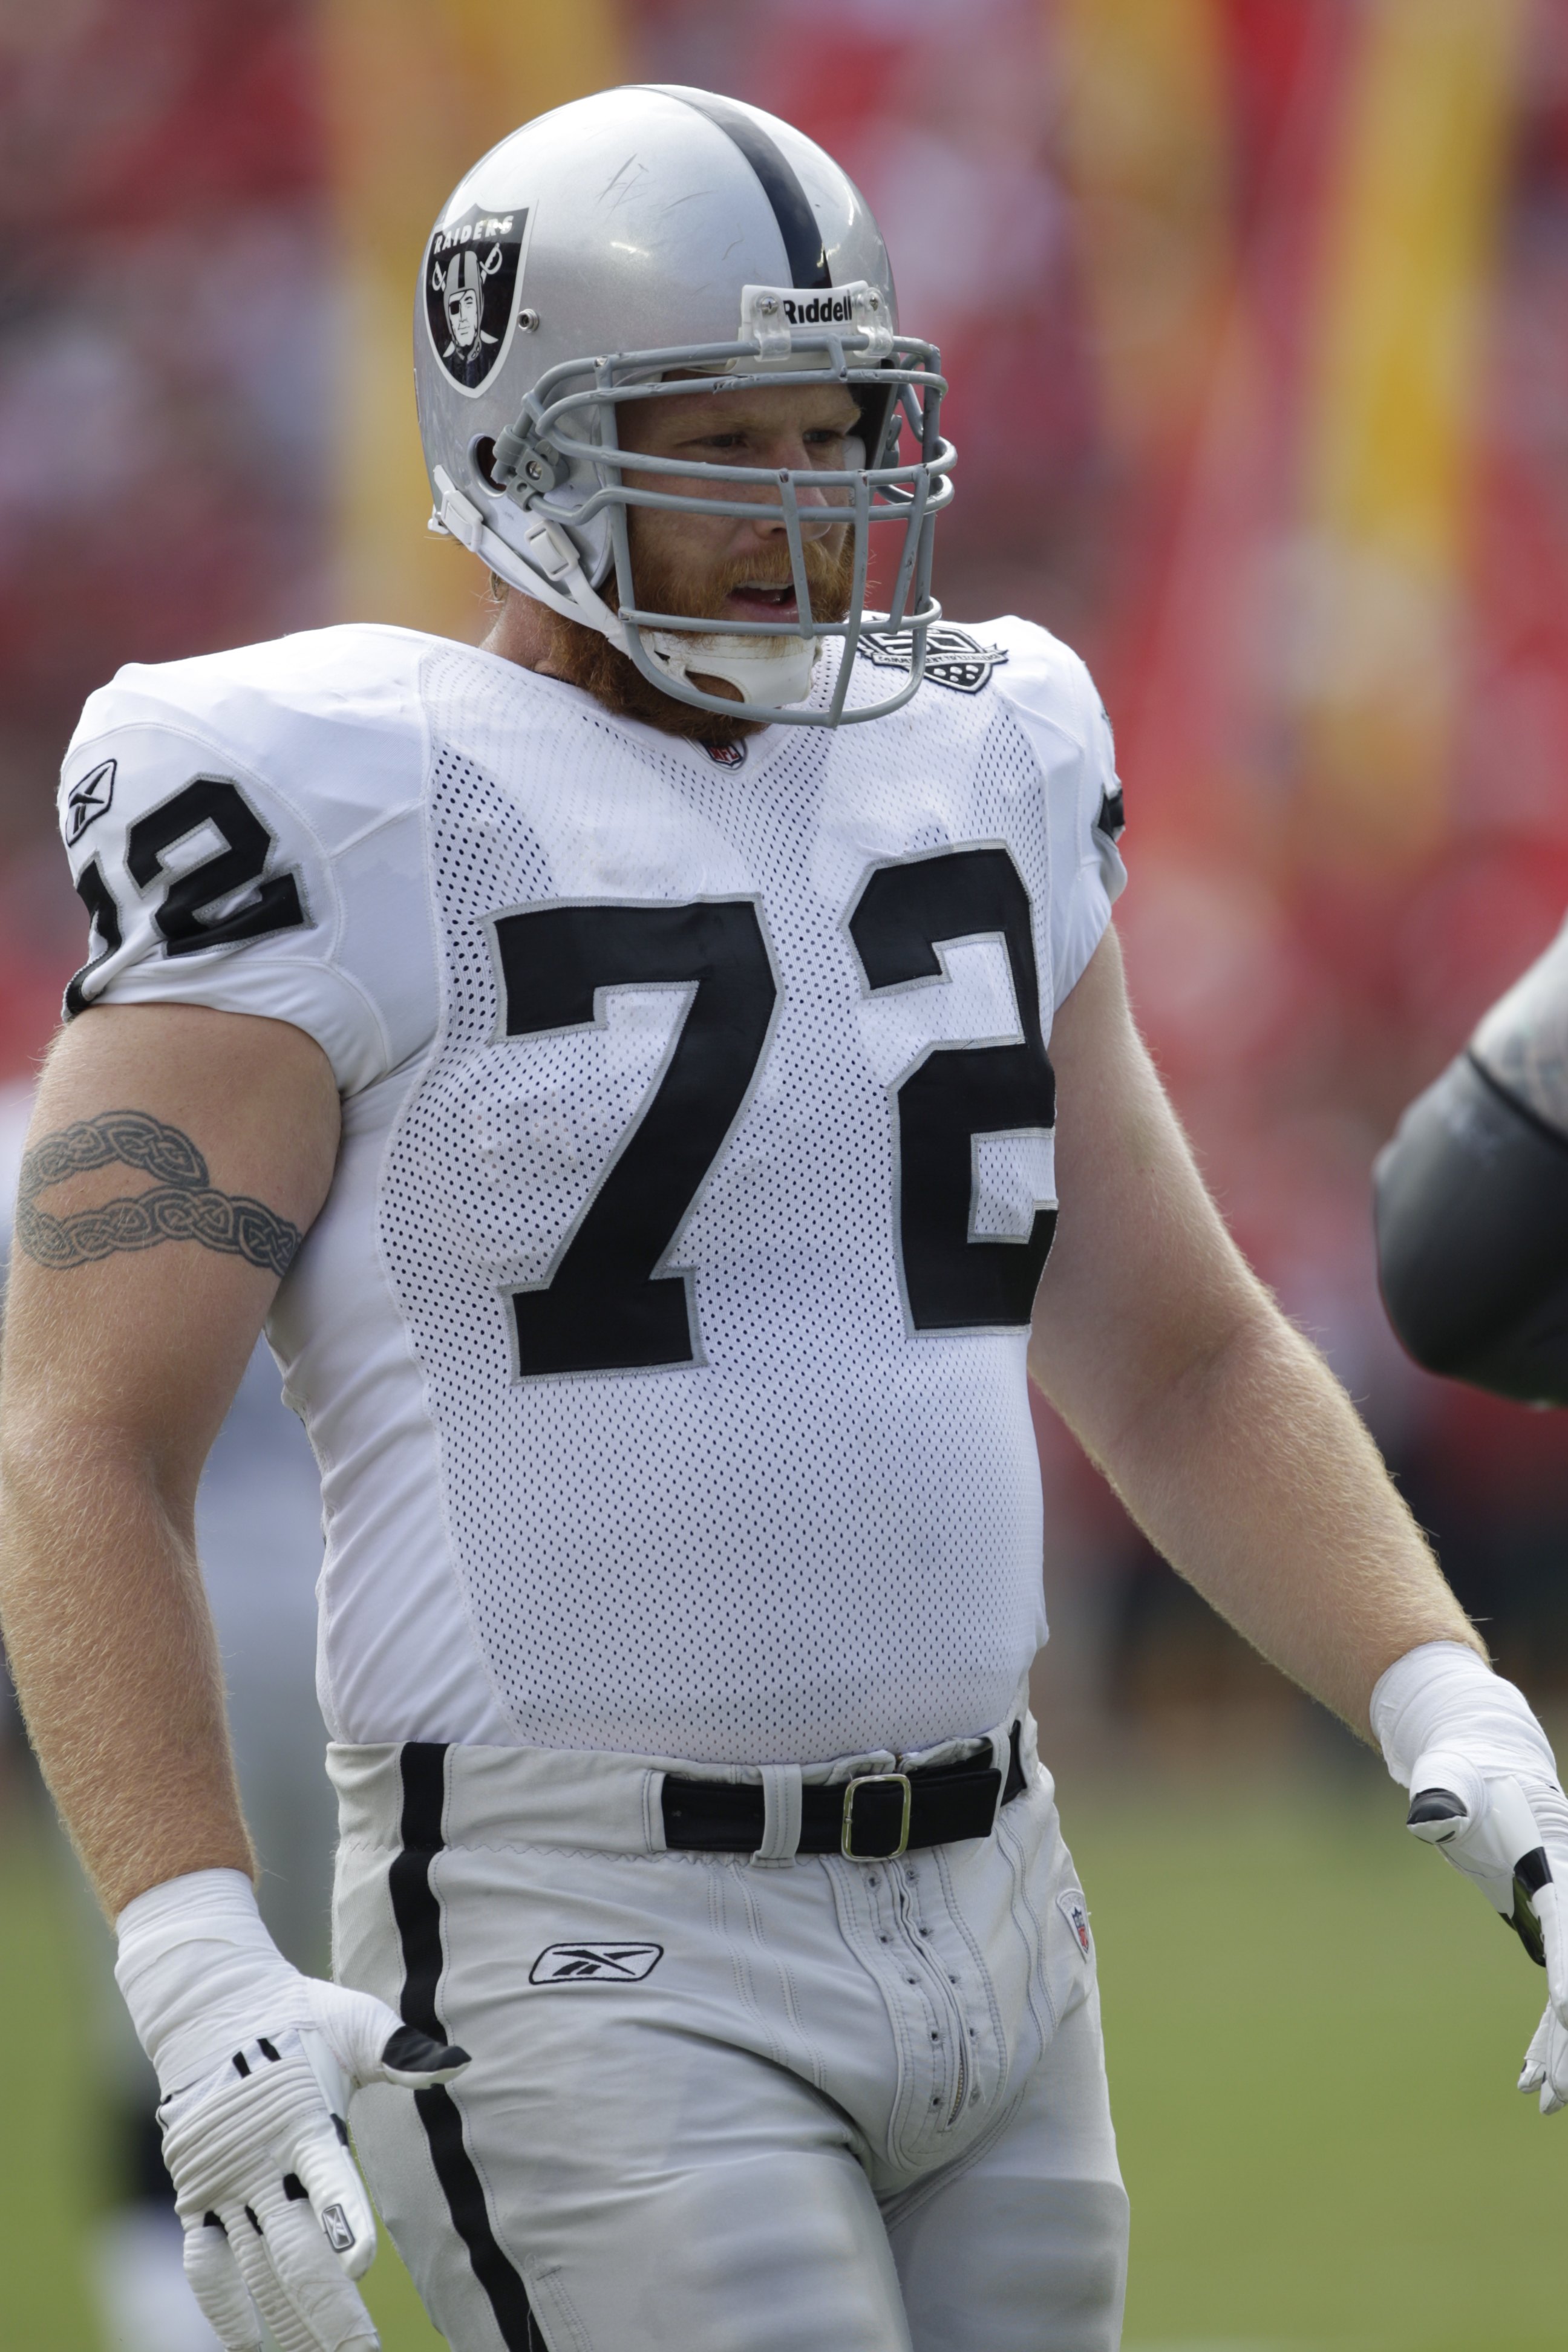 KANSAS CITY, MO - SEPTEMBER 20:  Erik Pears #72 of the Oakland Raiders looks on during the game against the Kansas City Chiefs at Arrowhead Stadium on September 20, 2009 in Kansas City, Missouri. (Photo by Jamie Squire/Getty Images)